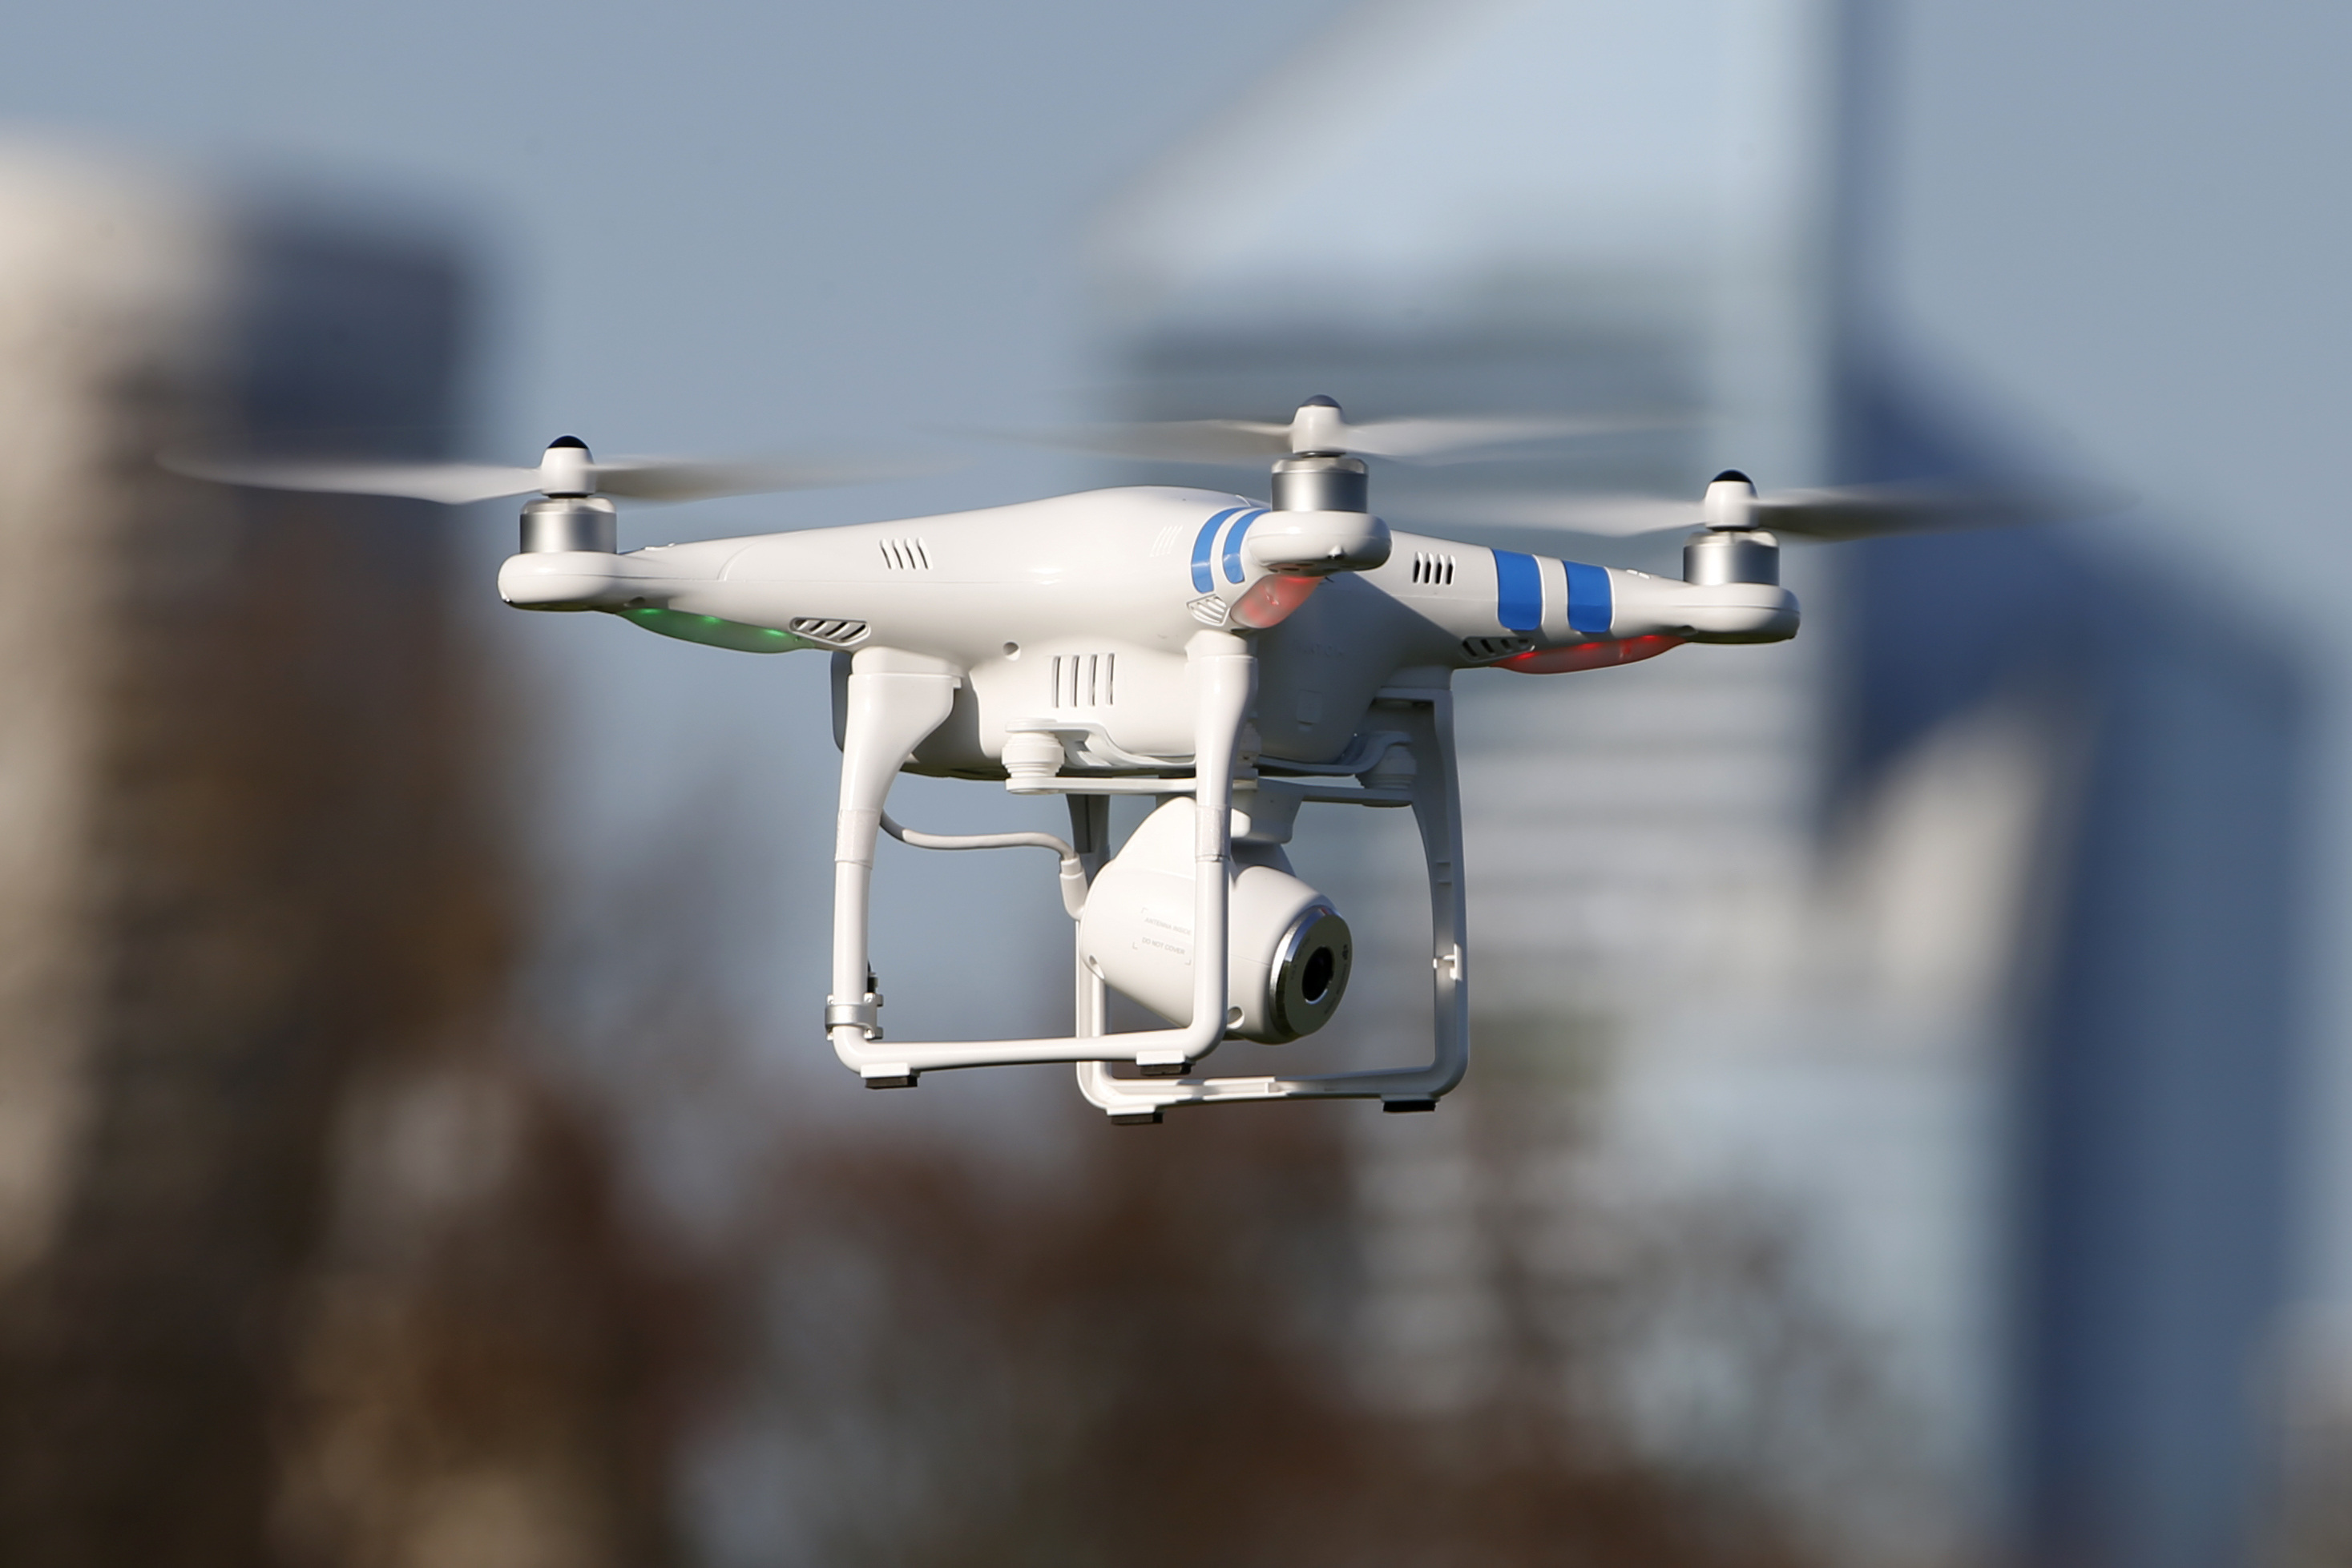 A 'Phantom 2' drone by DJI company flies during the 4th Intergalactic Meeting of Phantom's Pilots in an open secure area in the Bois de Boulogne, western Paris